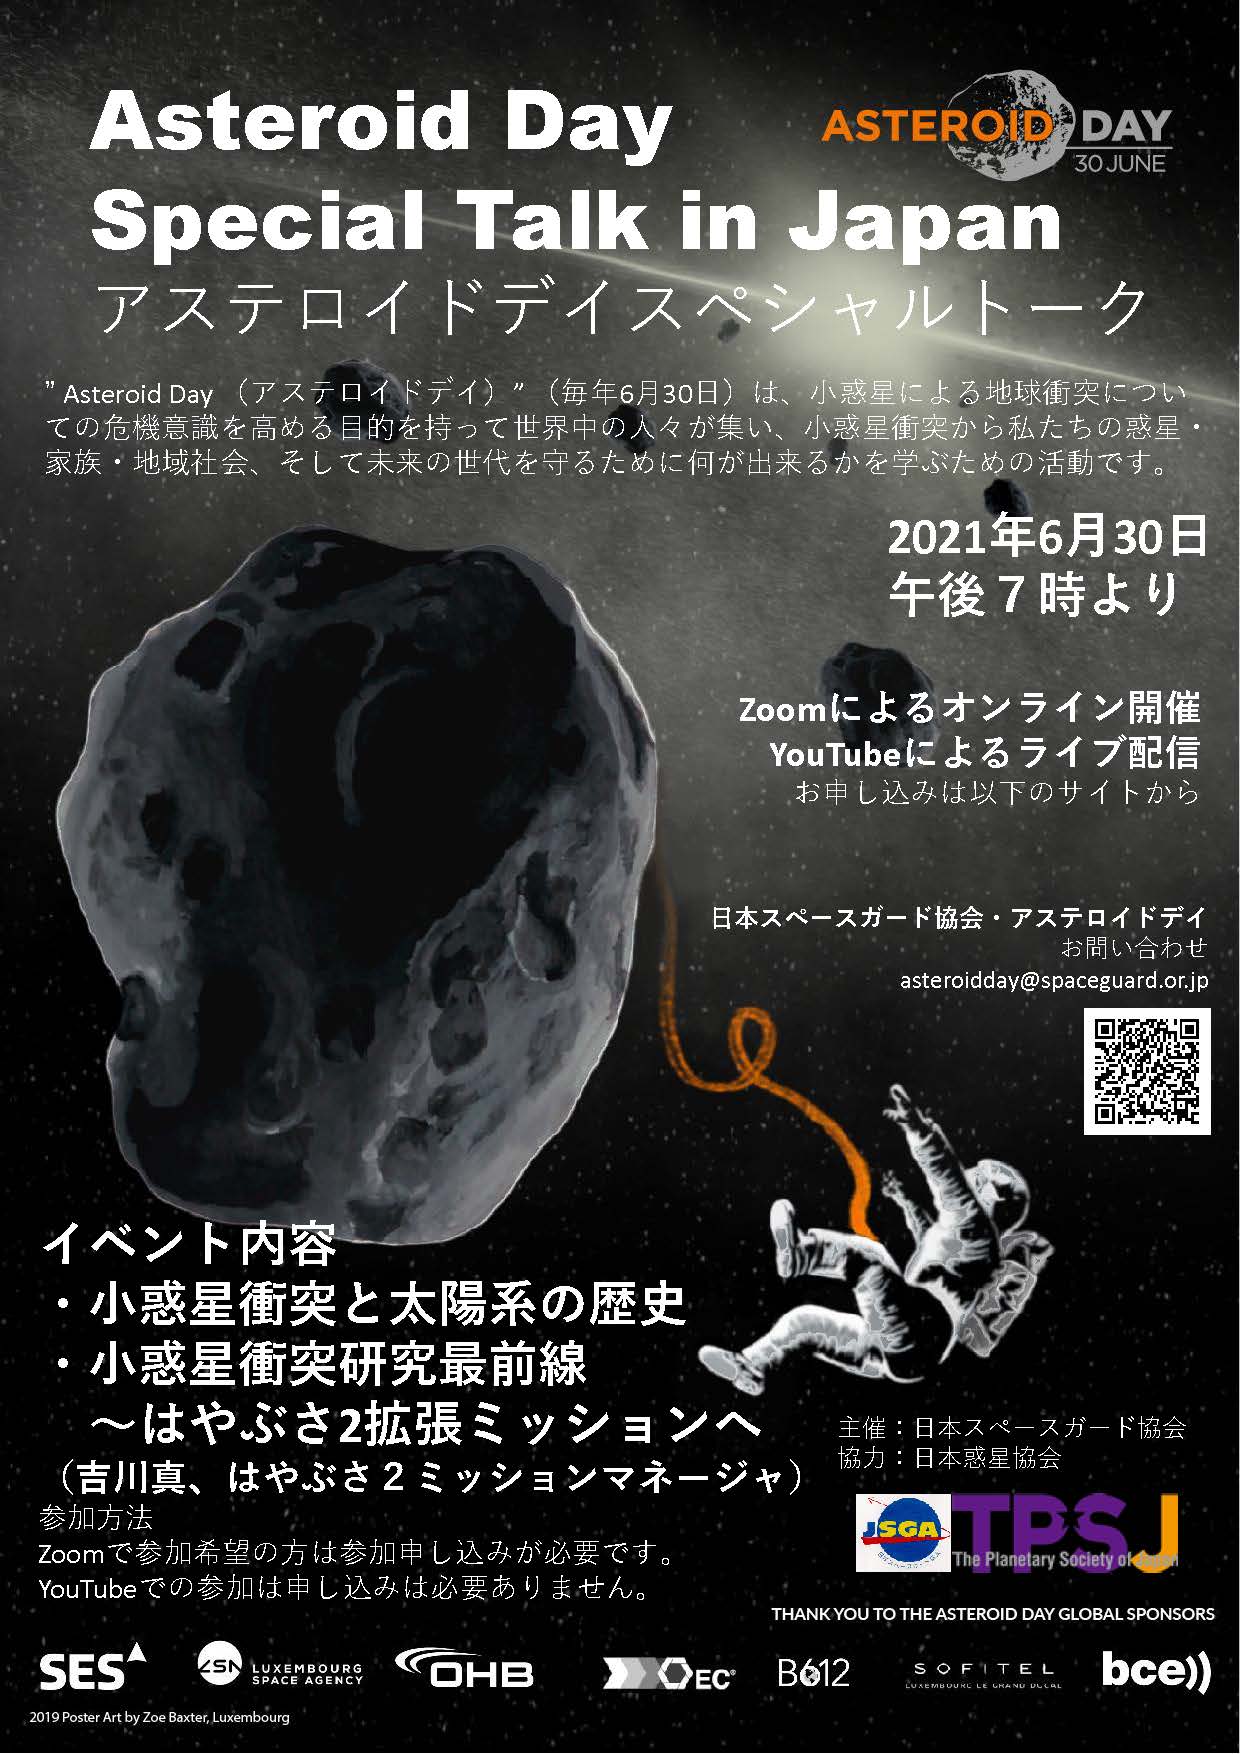 6/30Asteroid Day Special Talk 2021 in Japan